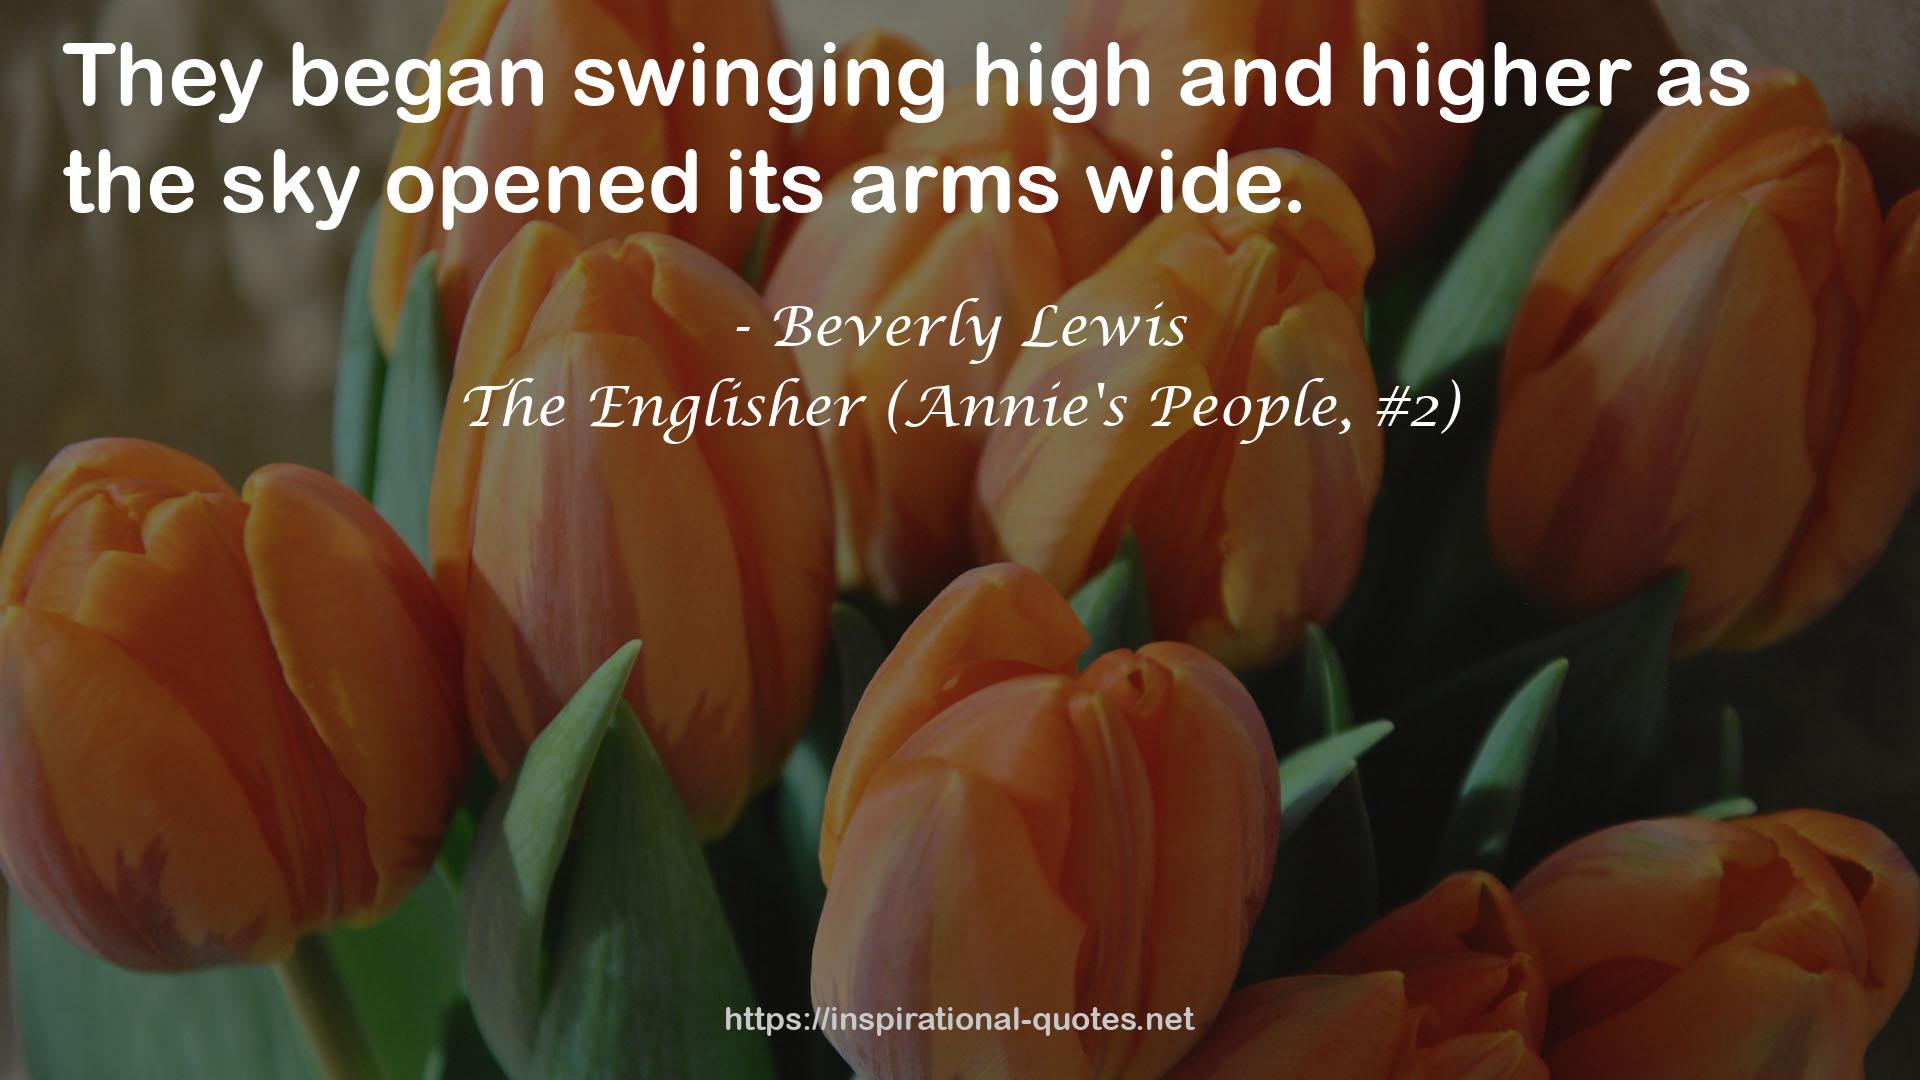 The Englisher (Annie's People, #2) QUOTES